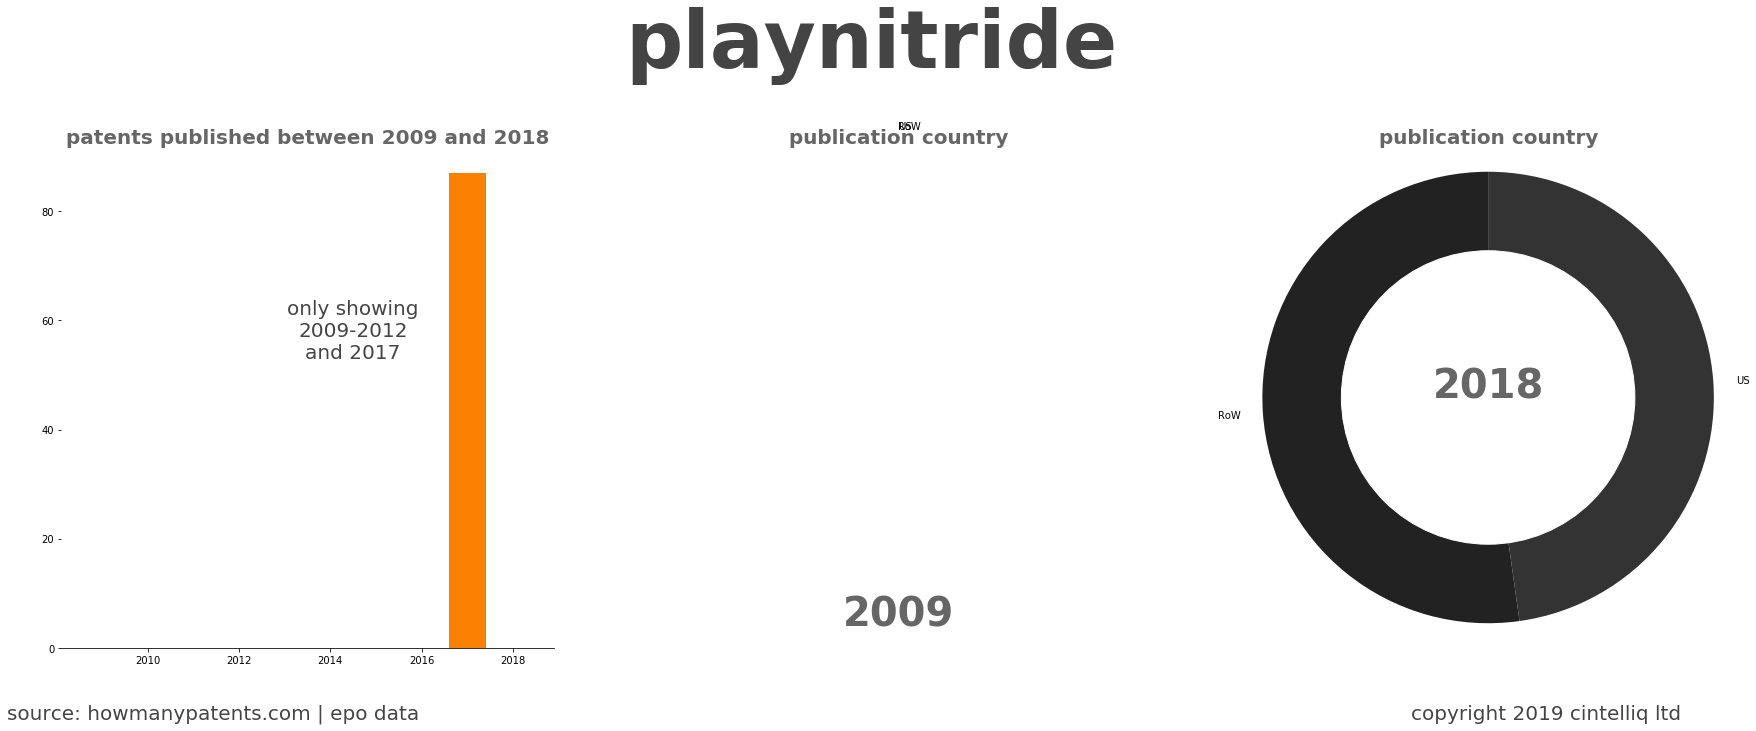 summary of patents for Playnitride